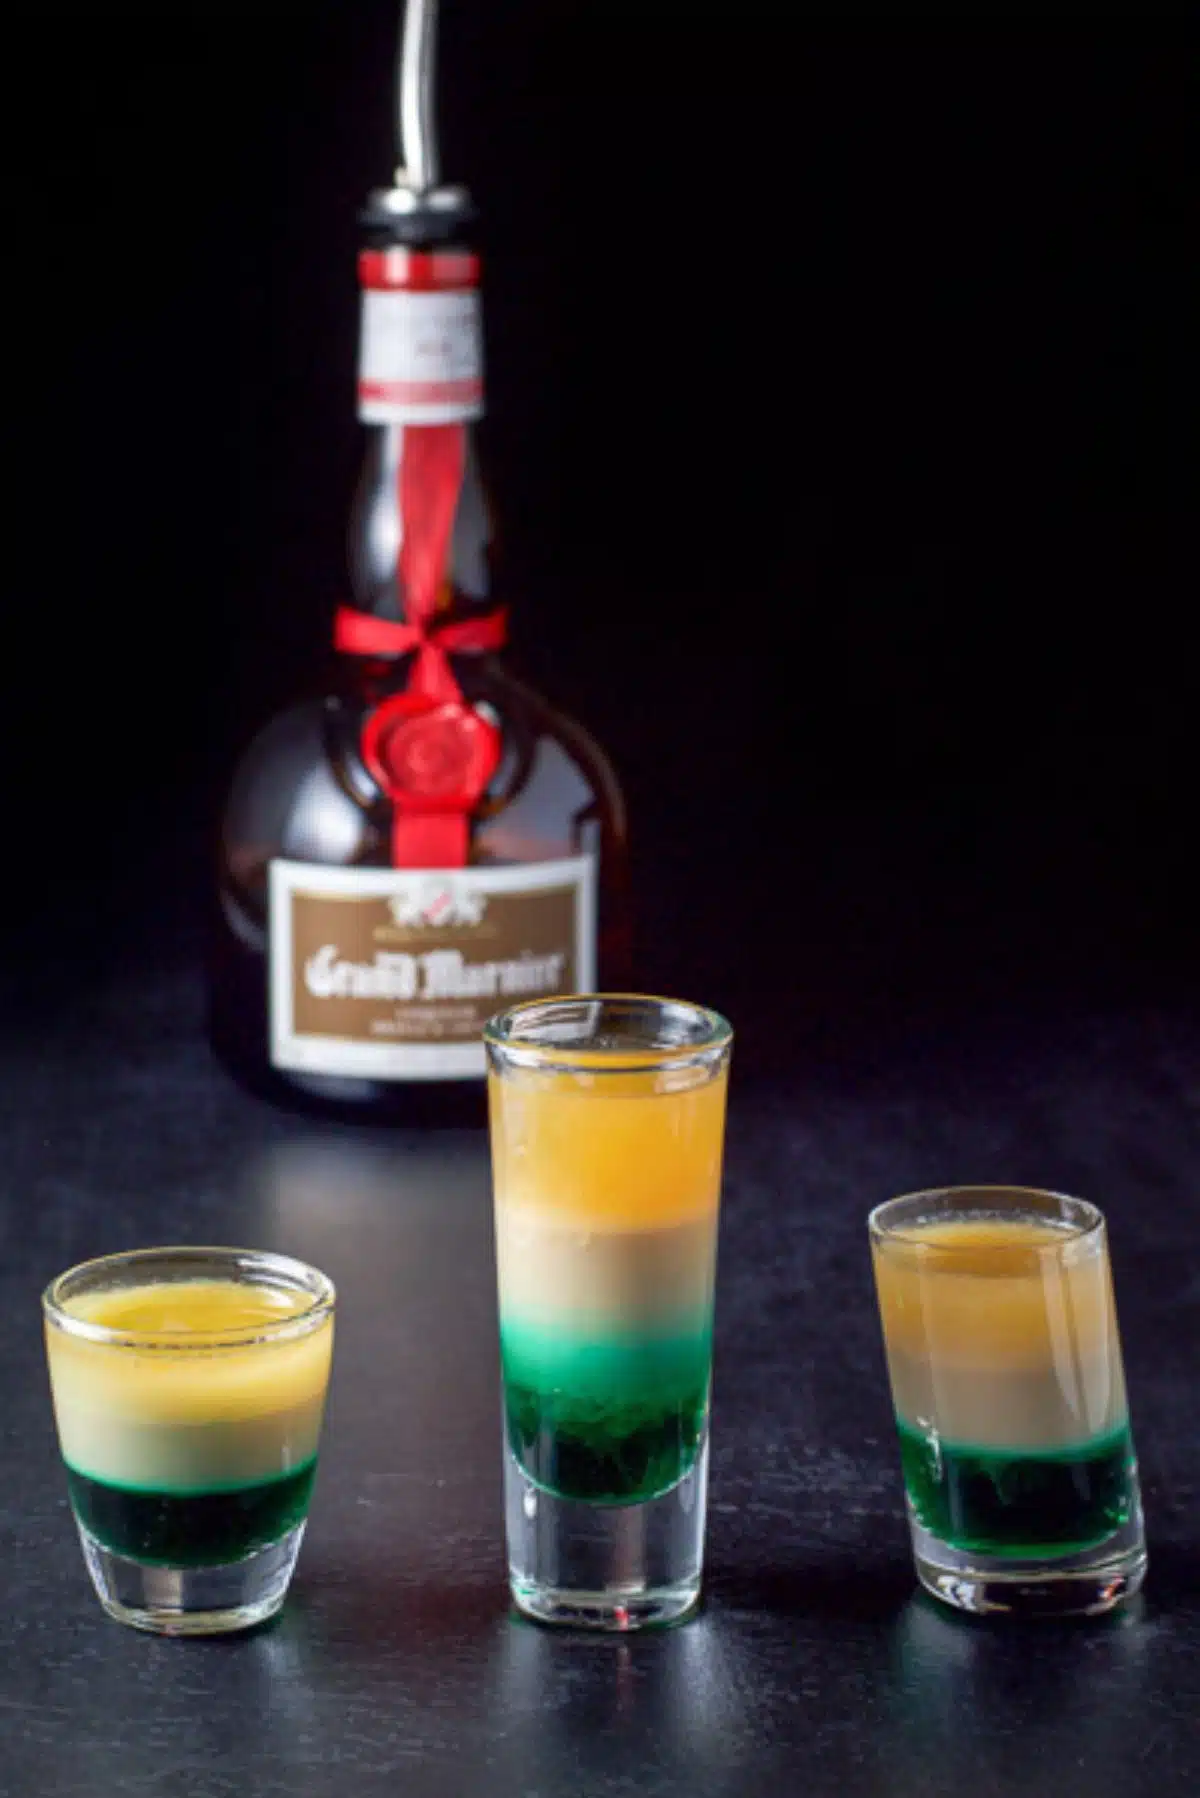 The three glasses filled with the green, beige and yellow shots in front of the bottle of grand marnier